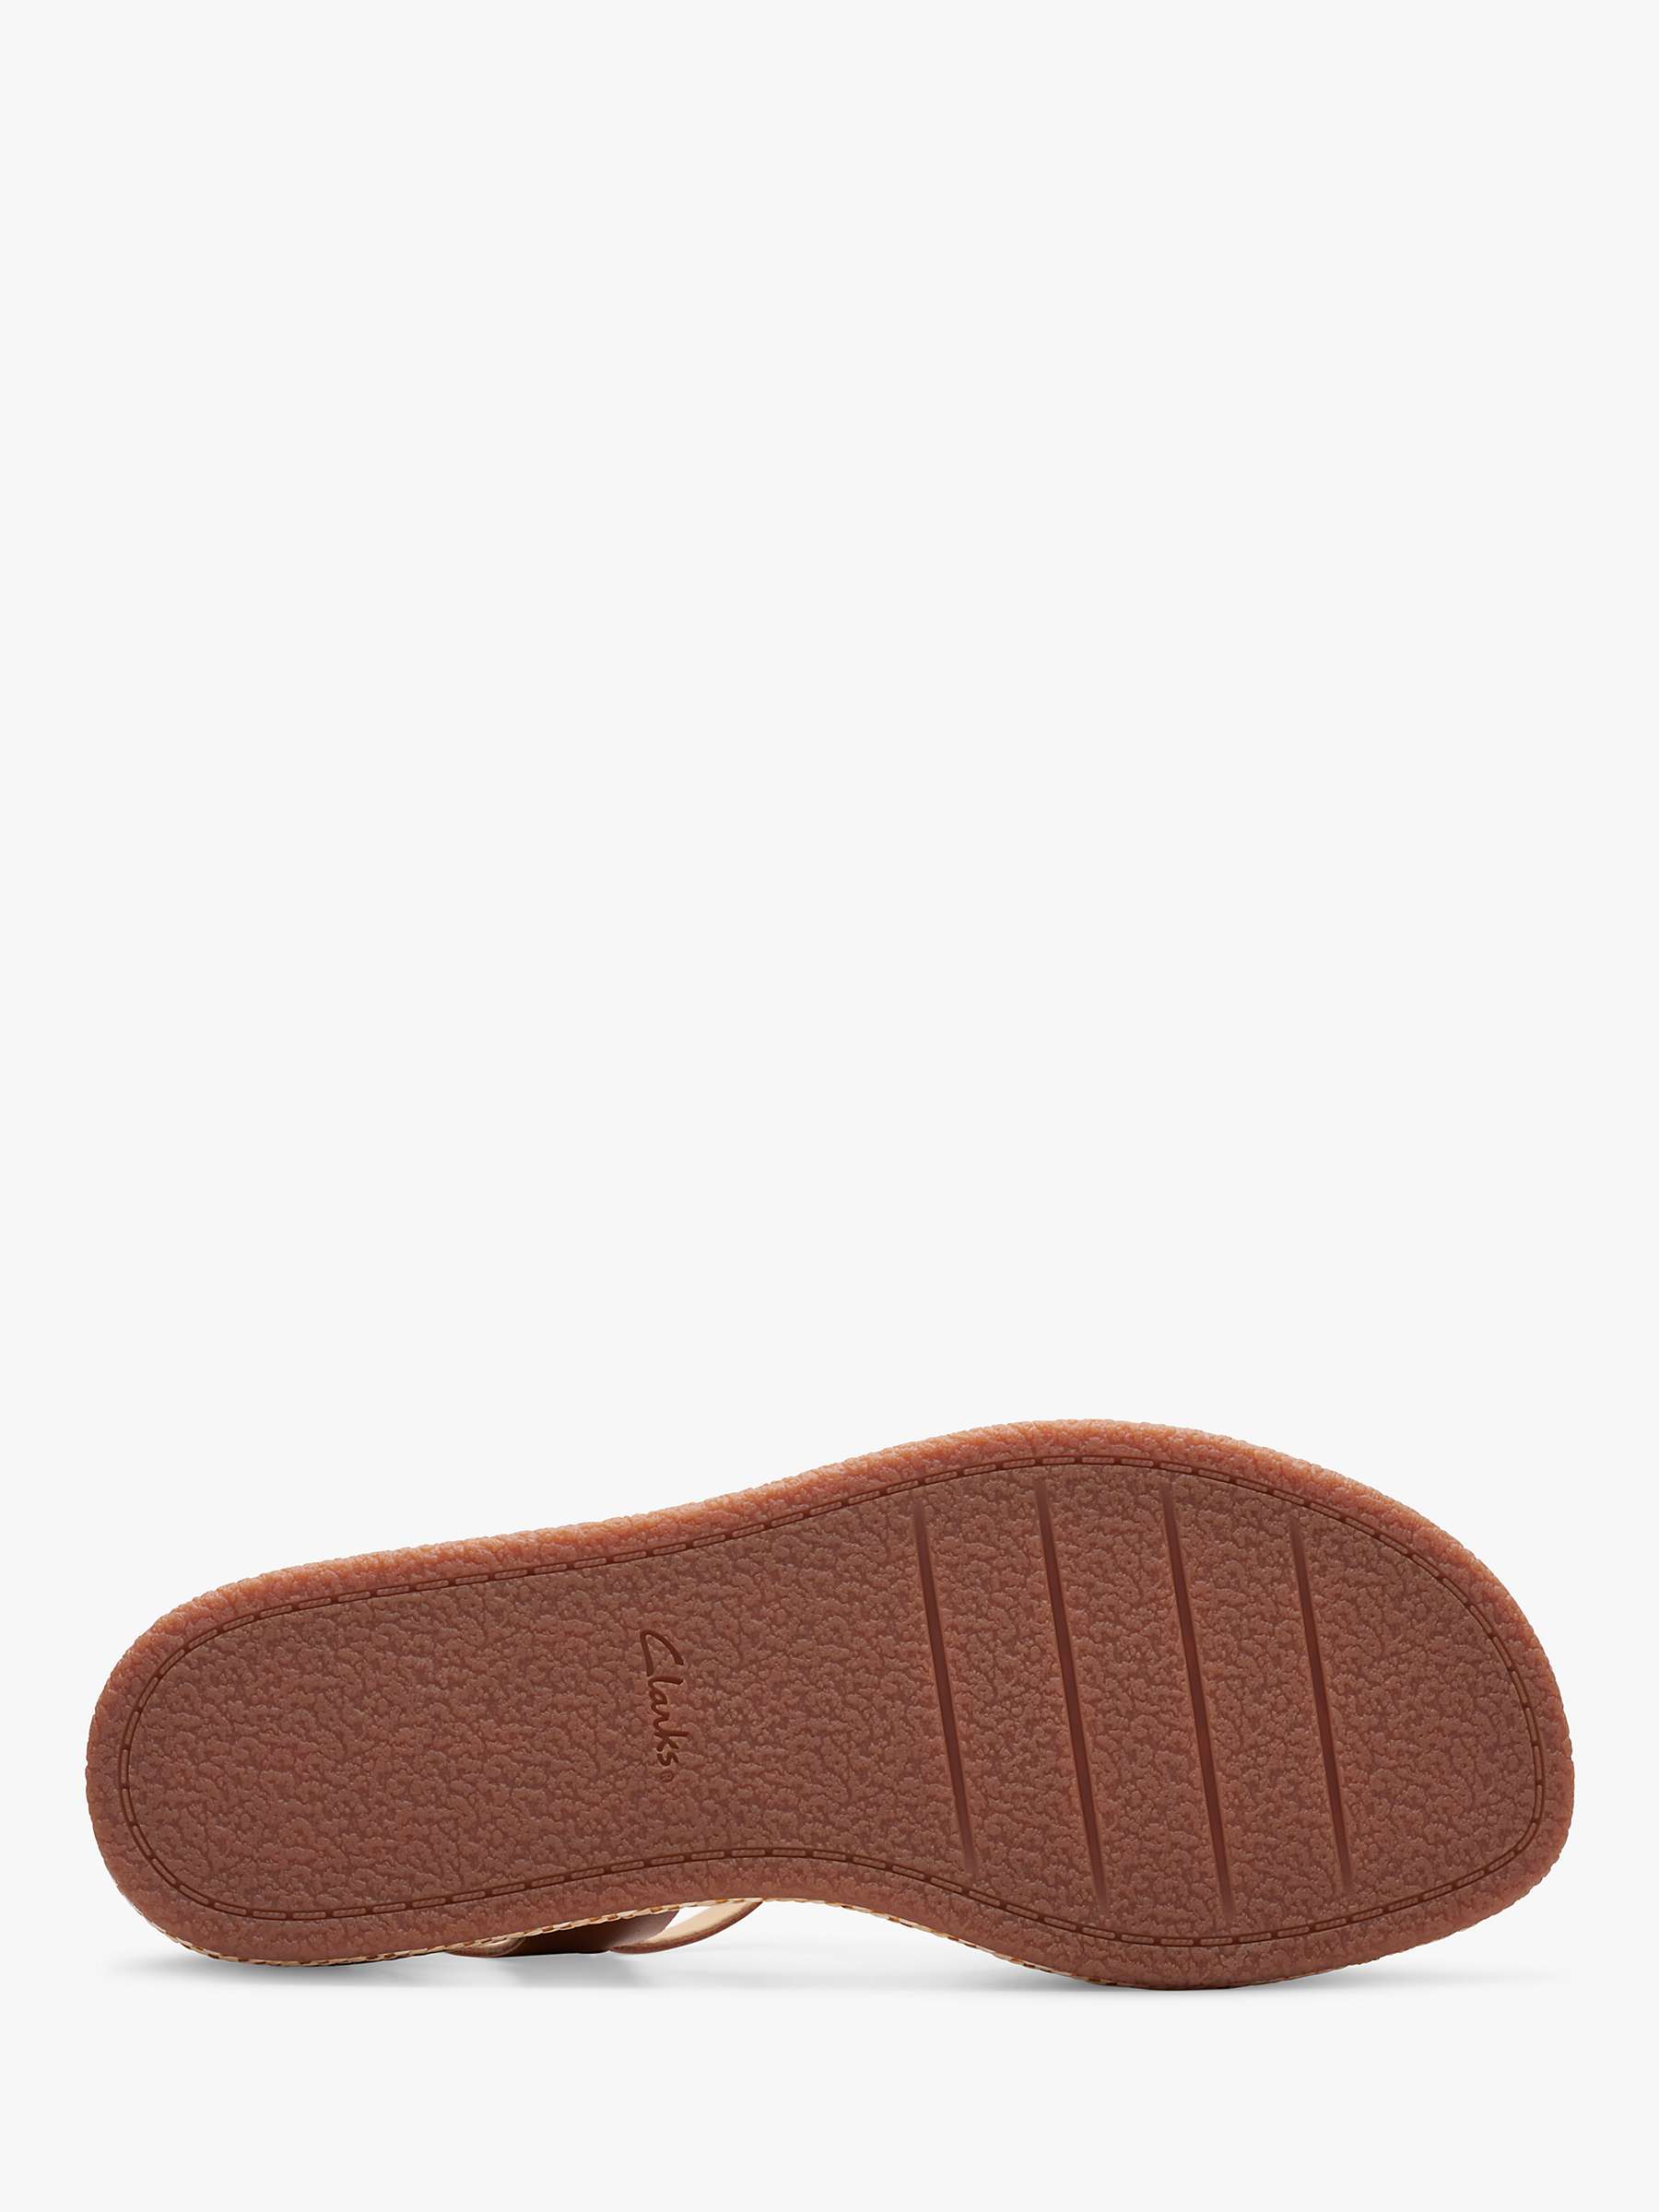 Buy Clarks Kimmei Twist Leather Wedge Sandals Online at johnlewis.com